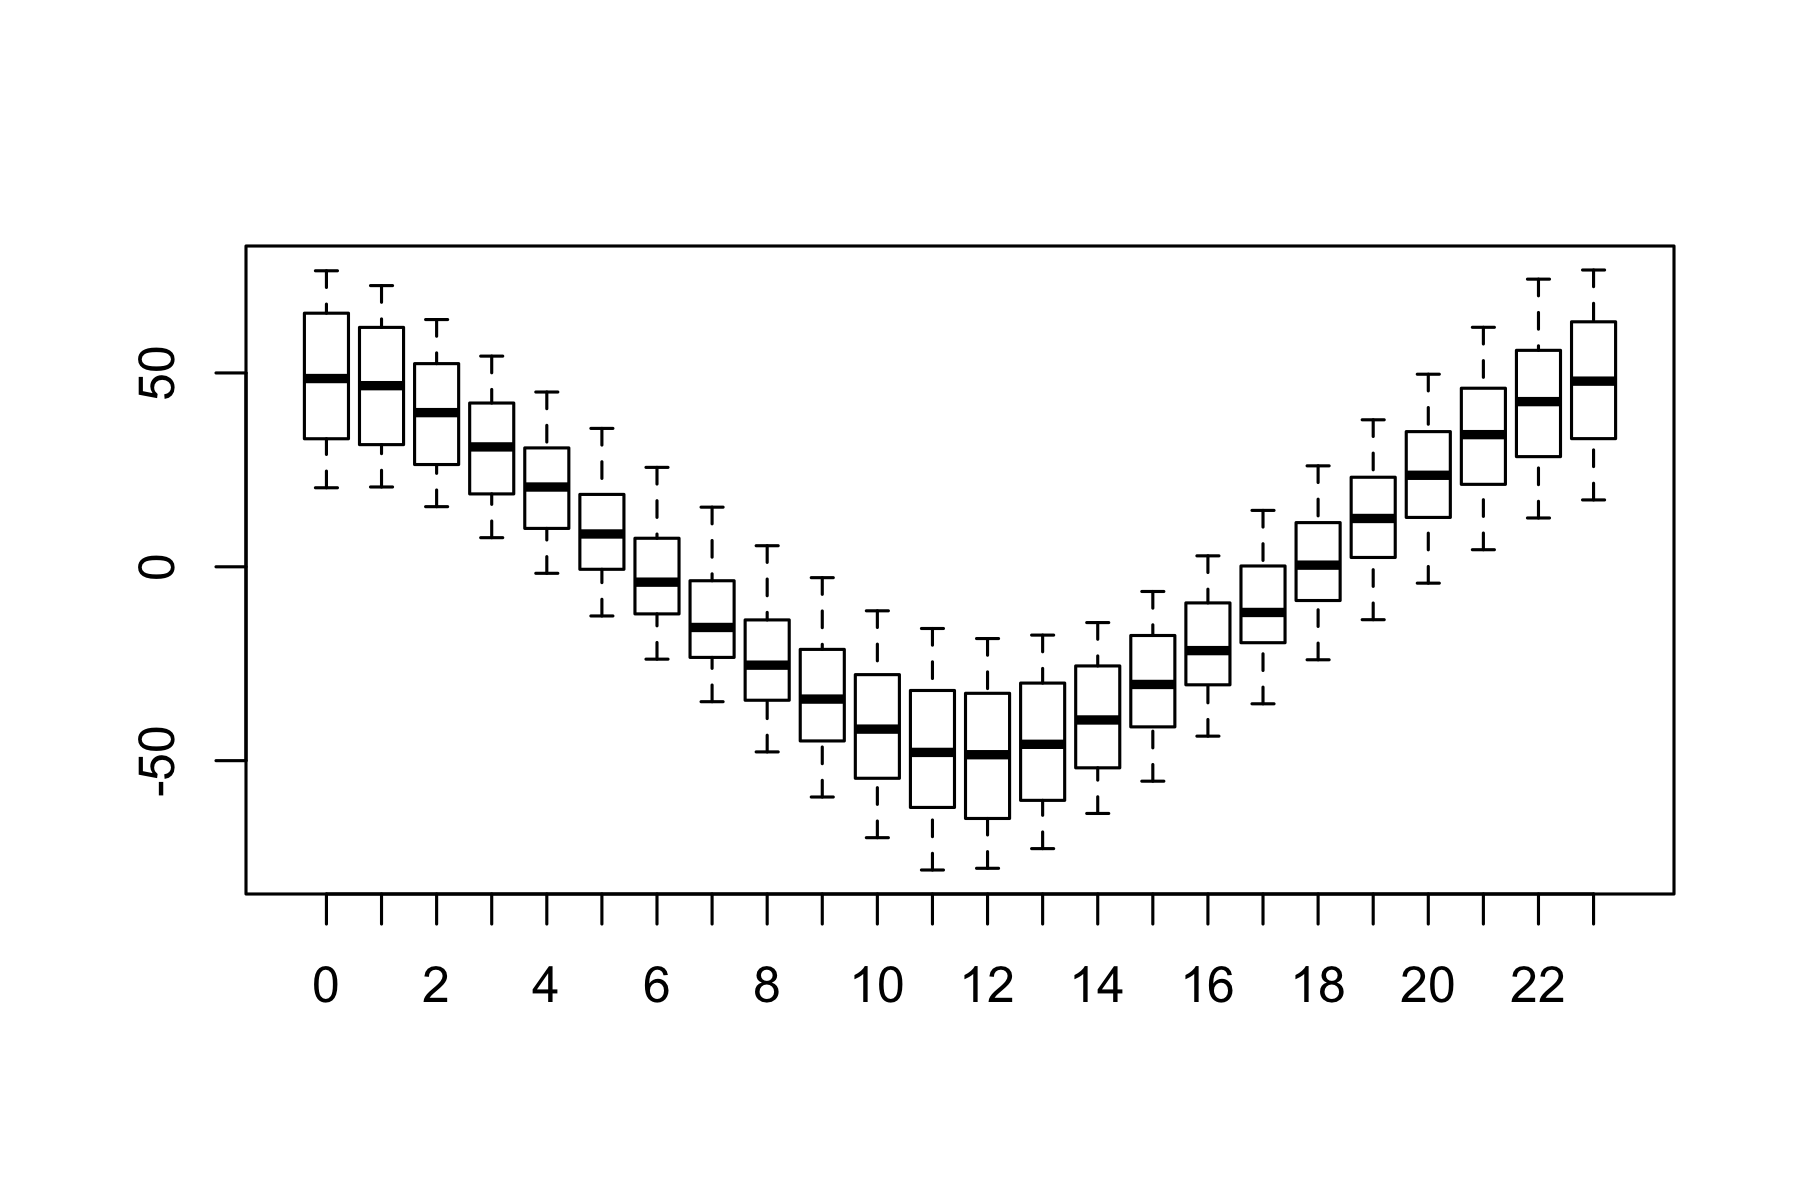 Variation in angle of sun by hour of day